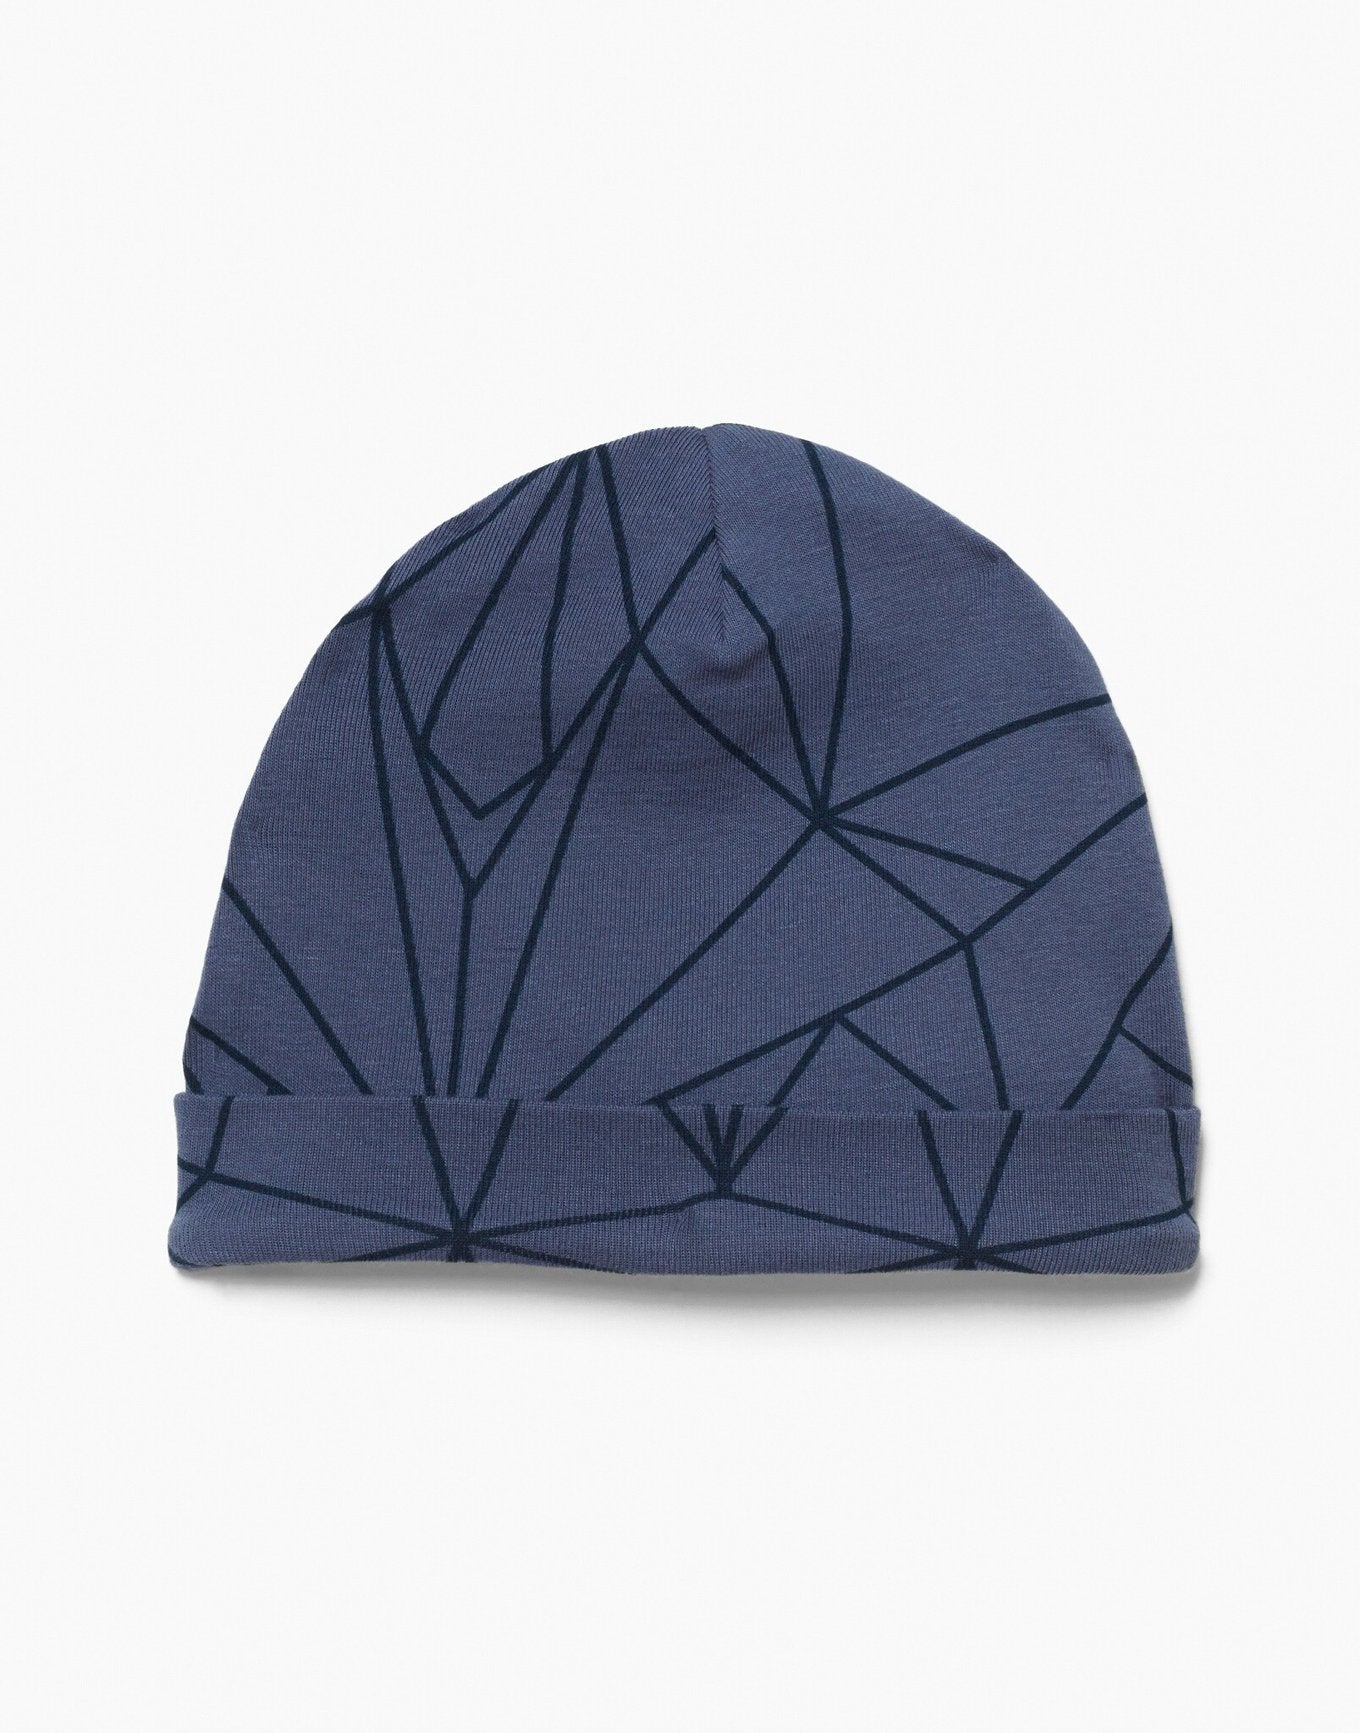 Outlines Kids Royal in color Blue Geo and shape cap hat & beanie